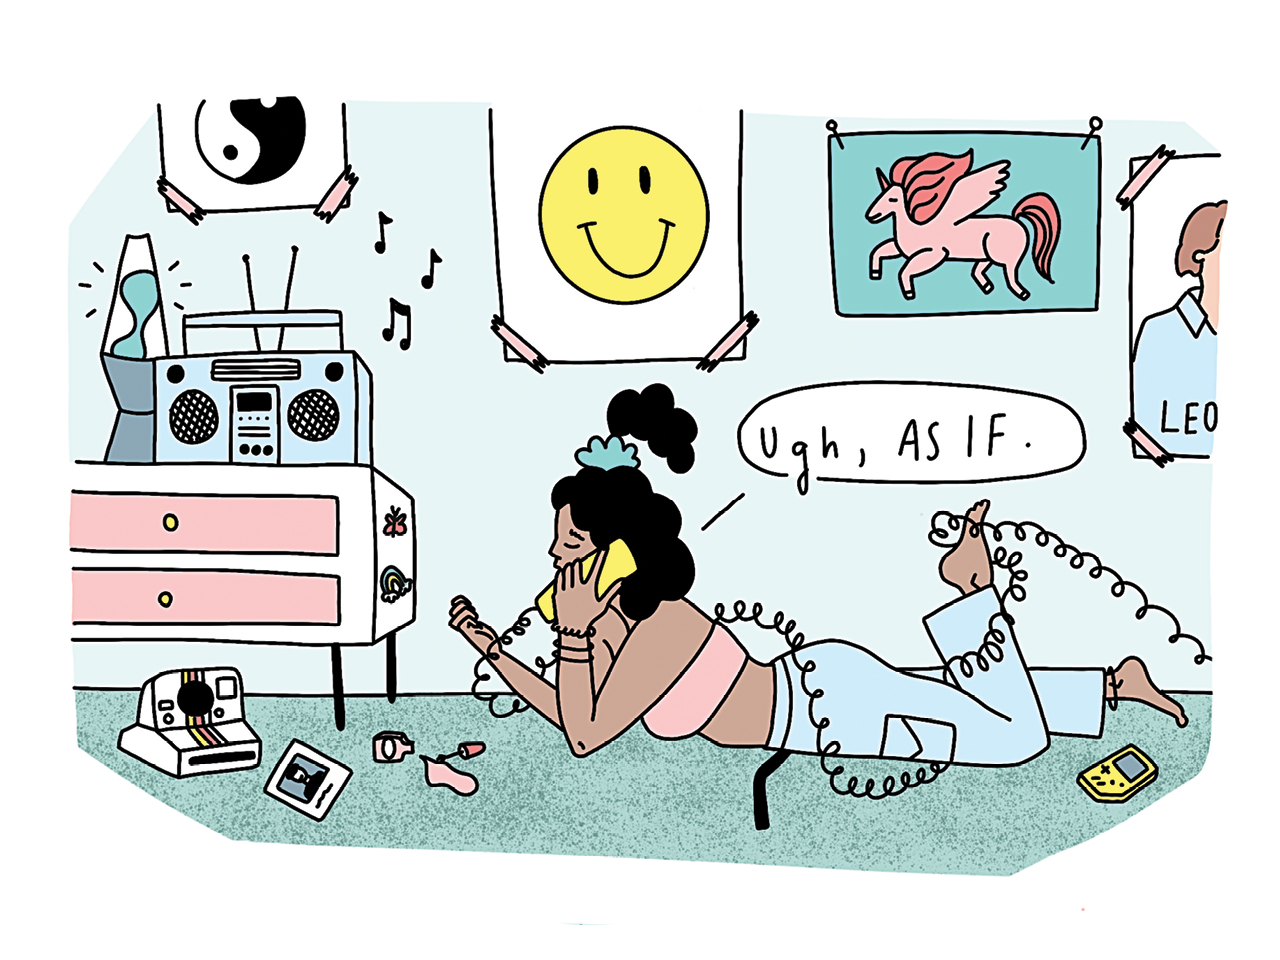 An illustration of a woman talking on the phone in her teenage bedroom, by Leeandra Cianci